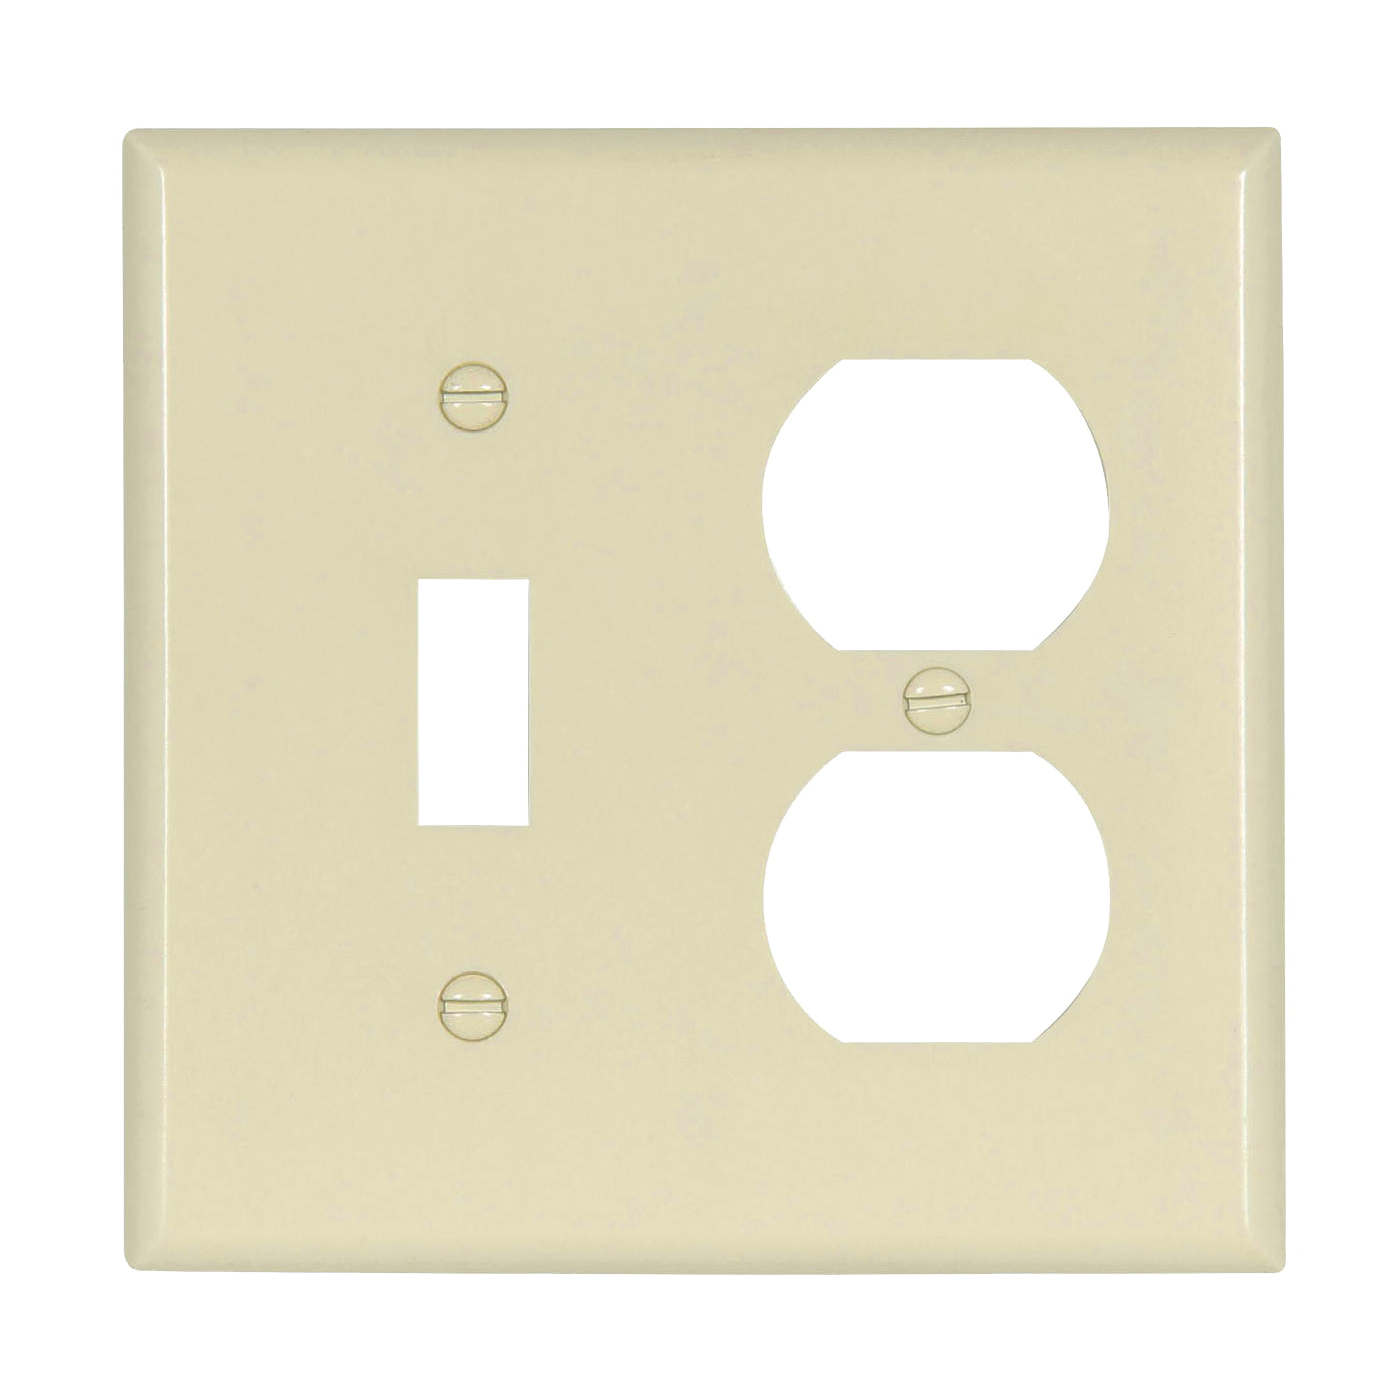 2138LA-BOX Combination Wallplate, 4-1/2 in L, 4-9/16 in W, 2 -Gang, Thermoset, Light Almond